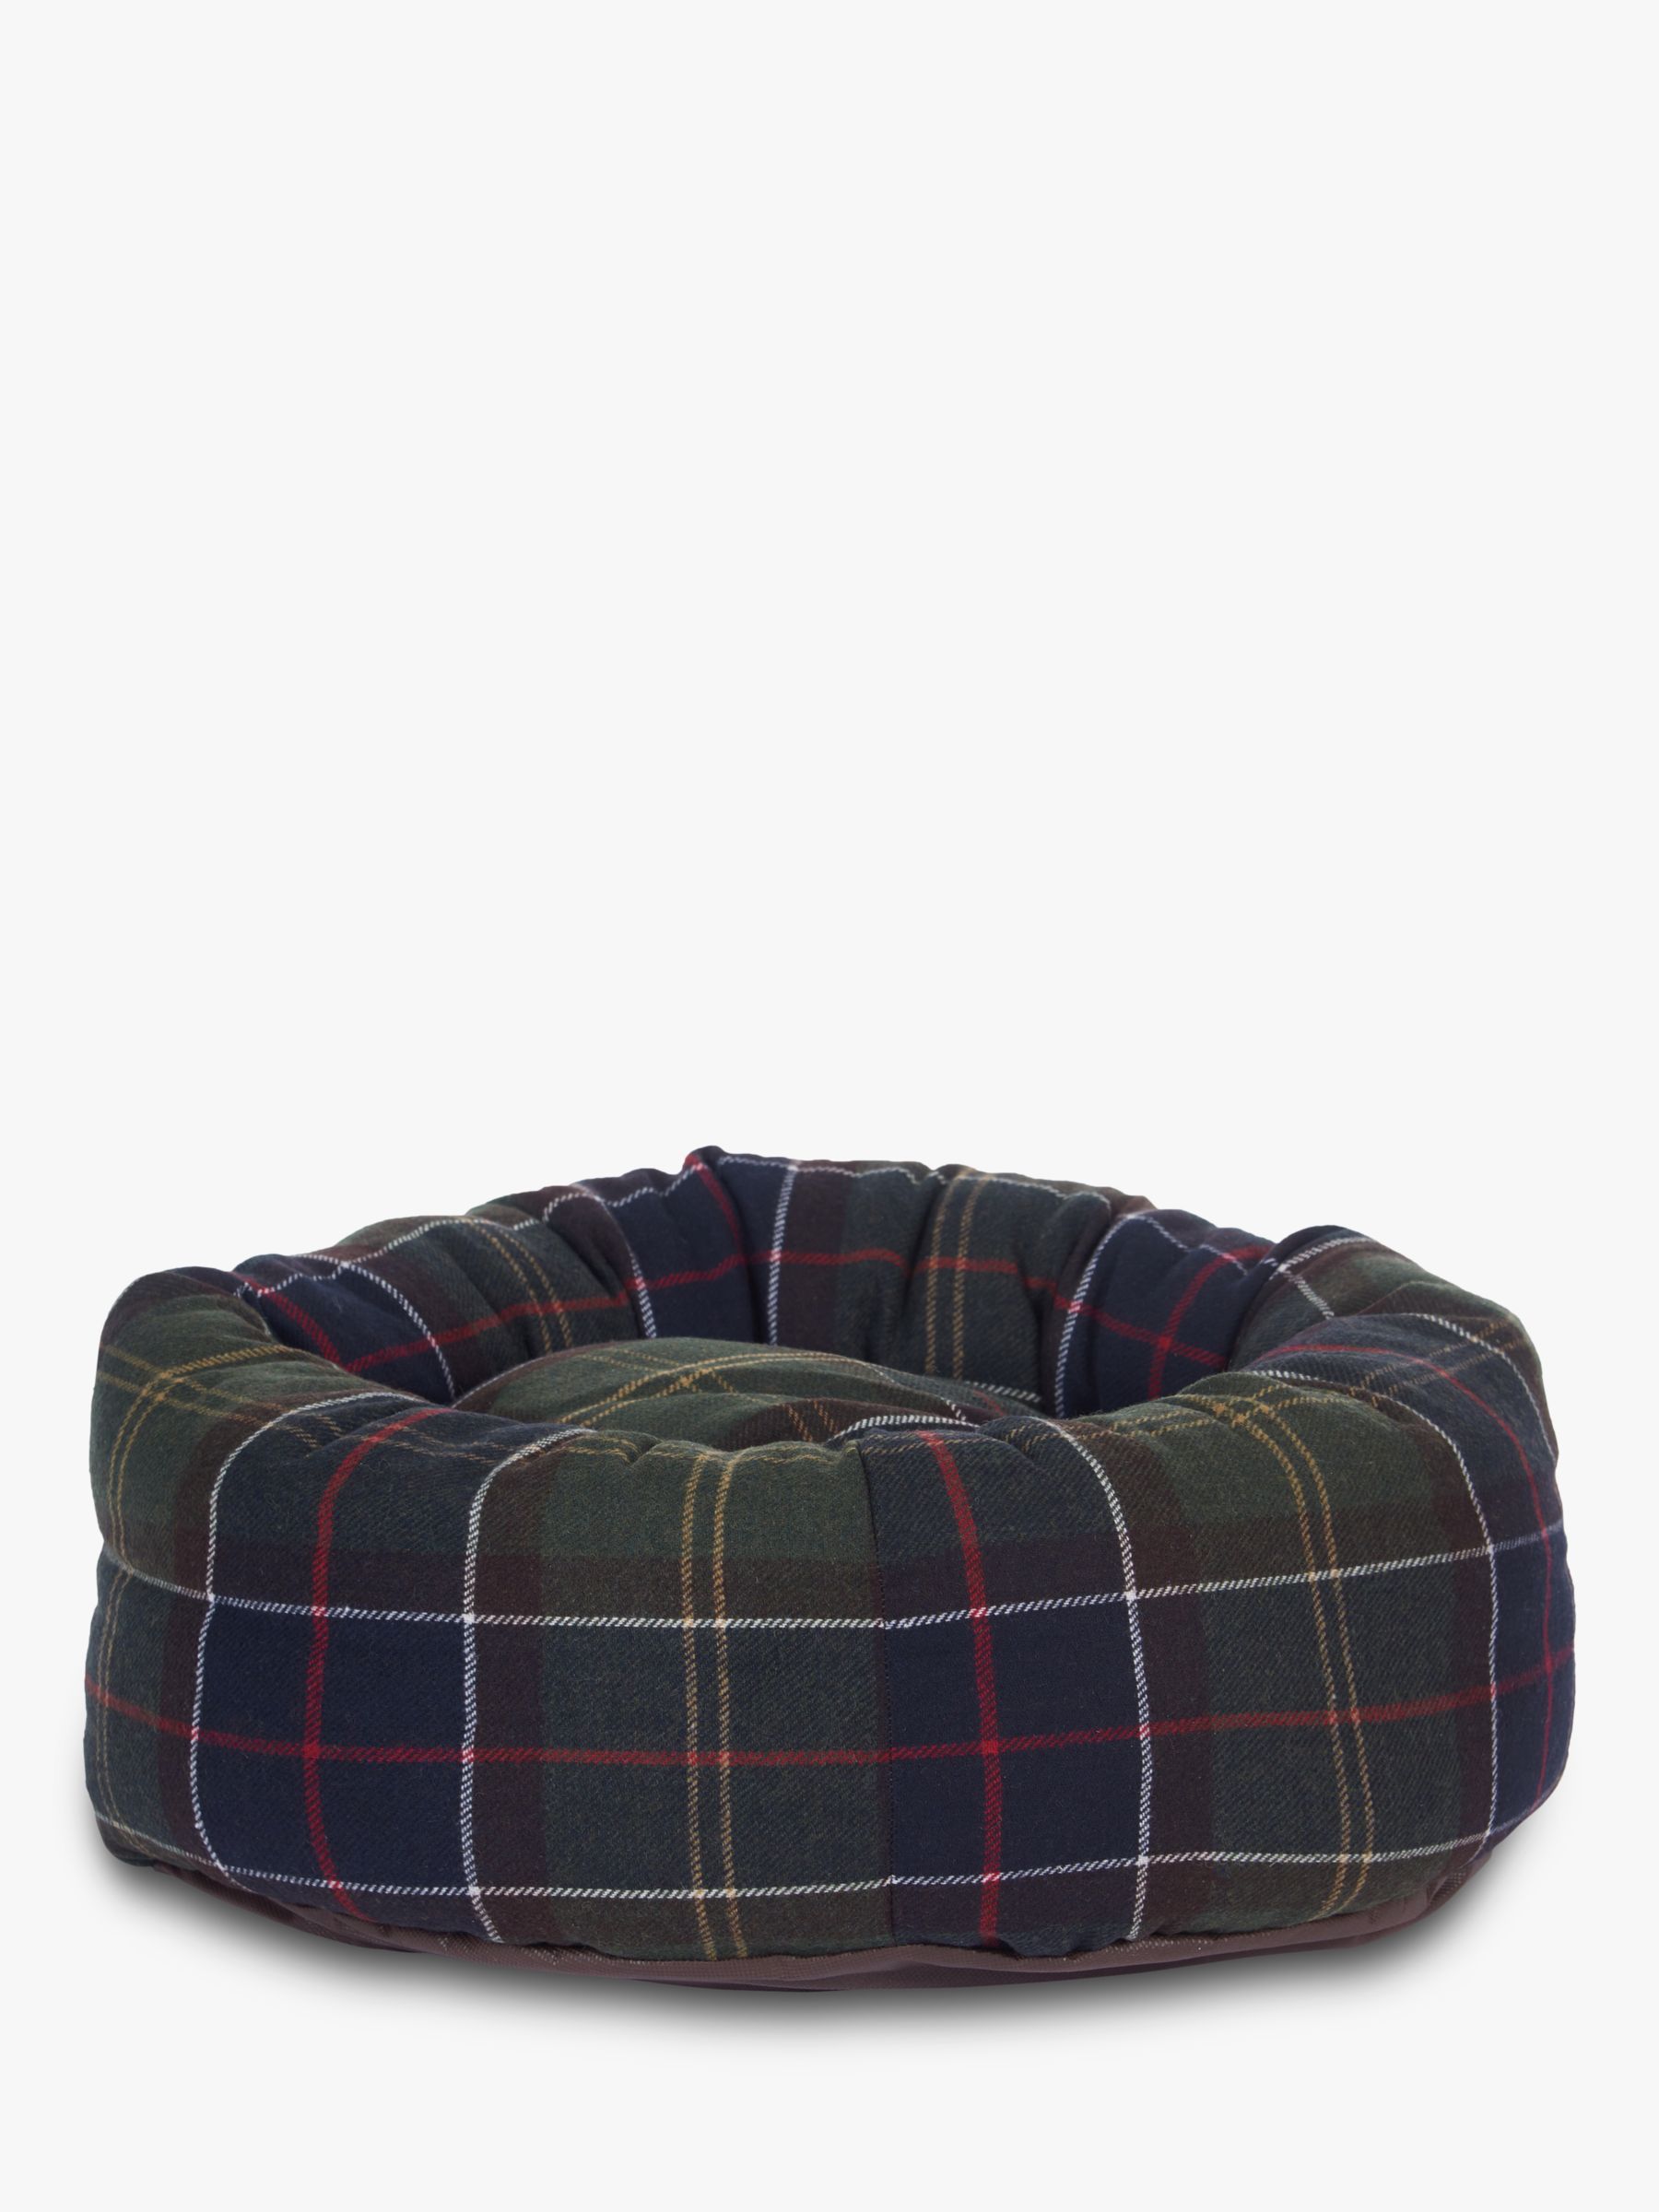 barbour dog beds